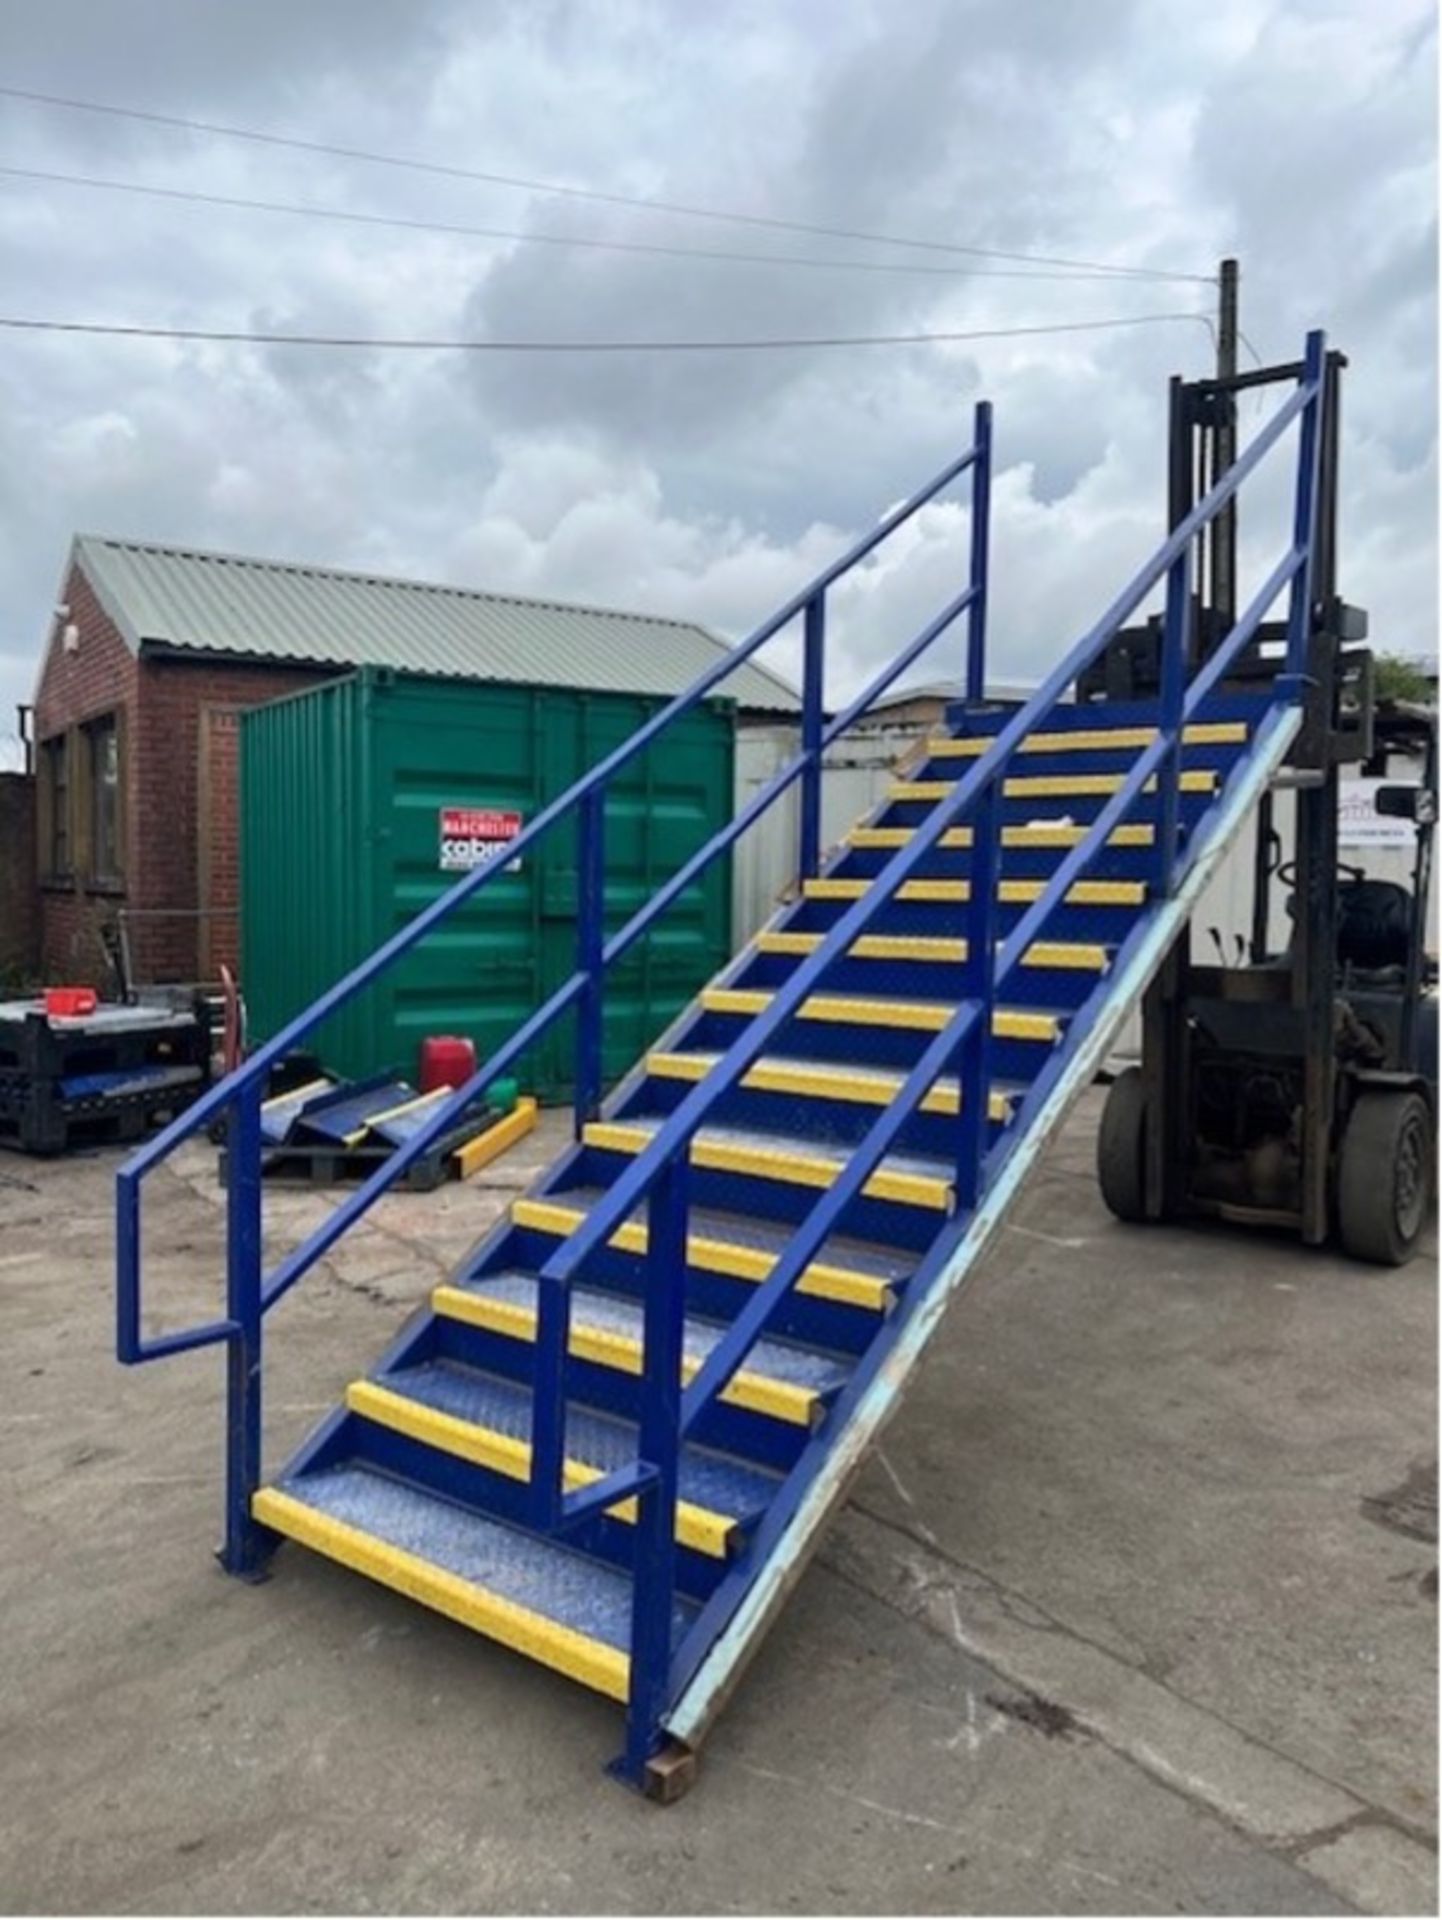 RRP £3600 Lot To Contain Blue Mezzanine Floor Steel Staircase 2.13M Finishing Height - Measuremnts - Image 2 of 2